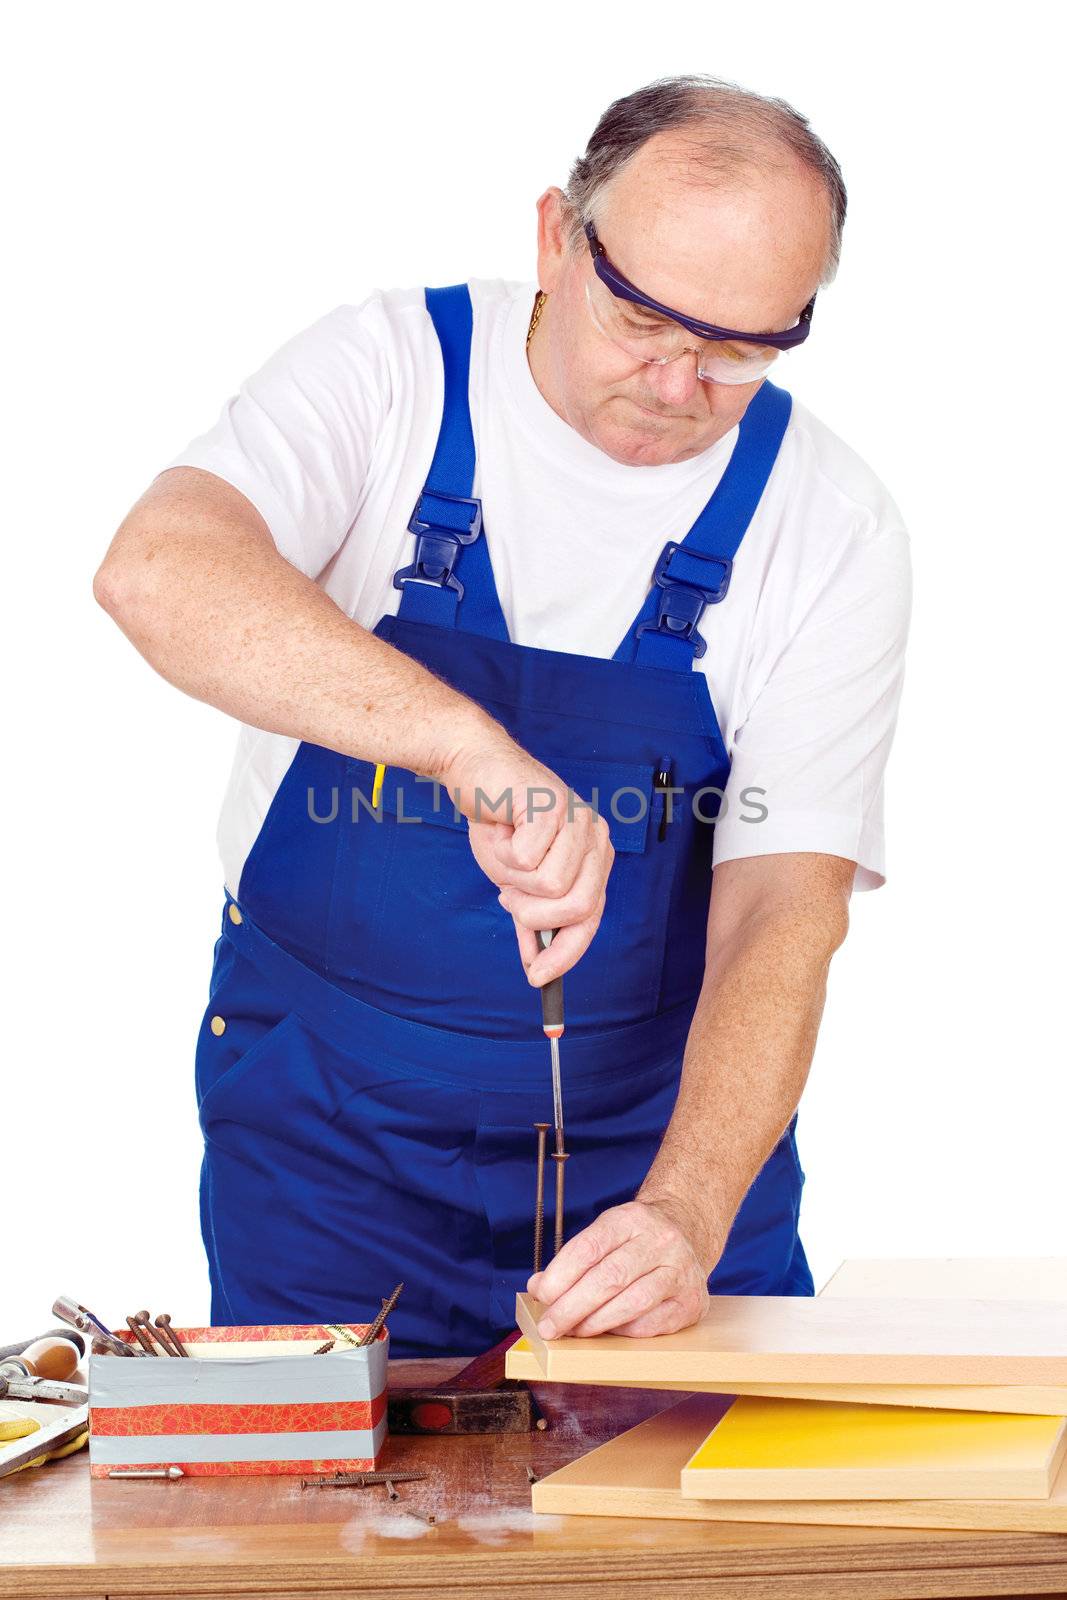 Middle age worker screwing nail in panel board, isolated on white background